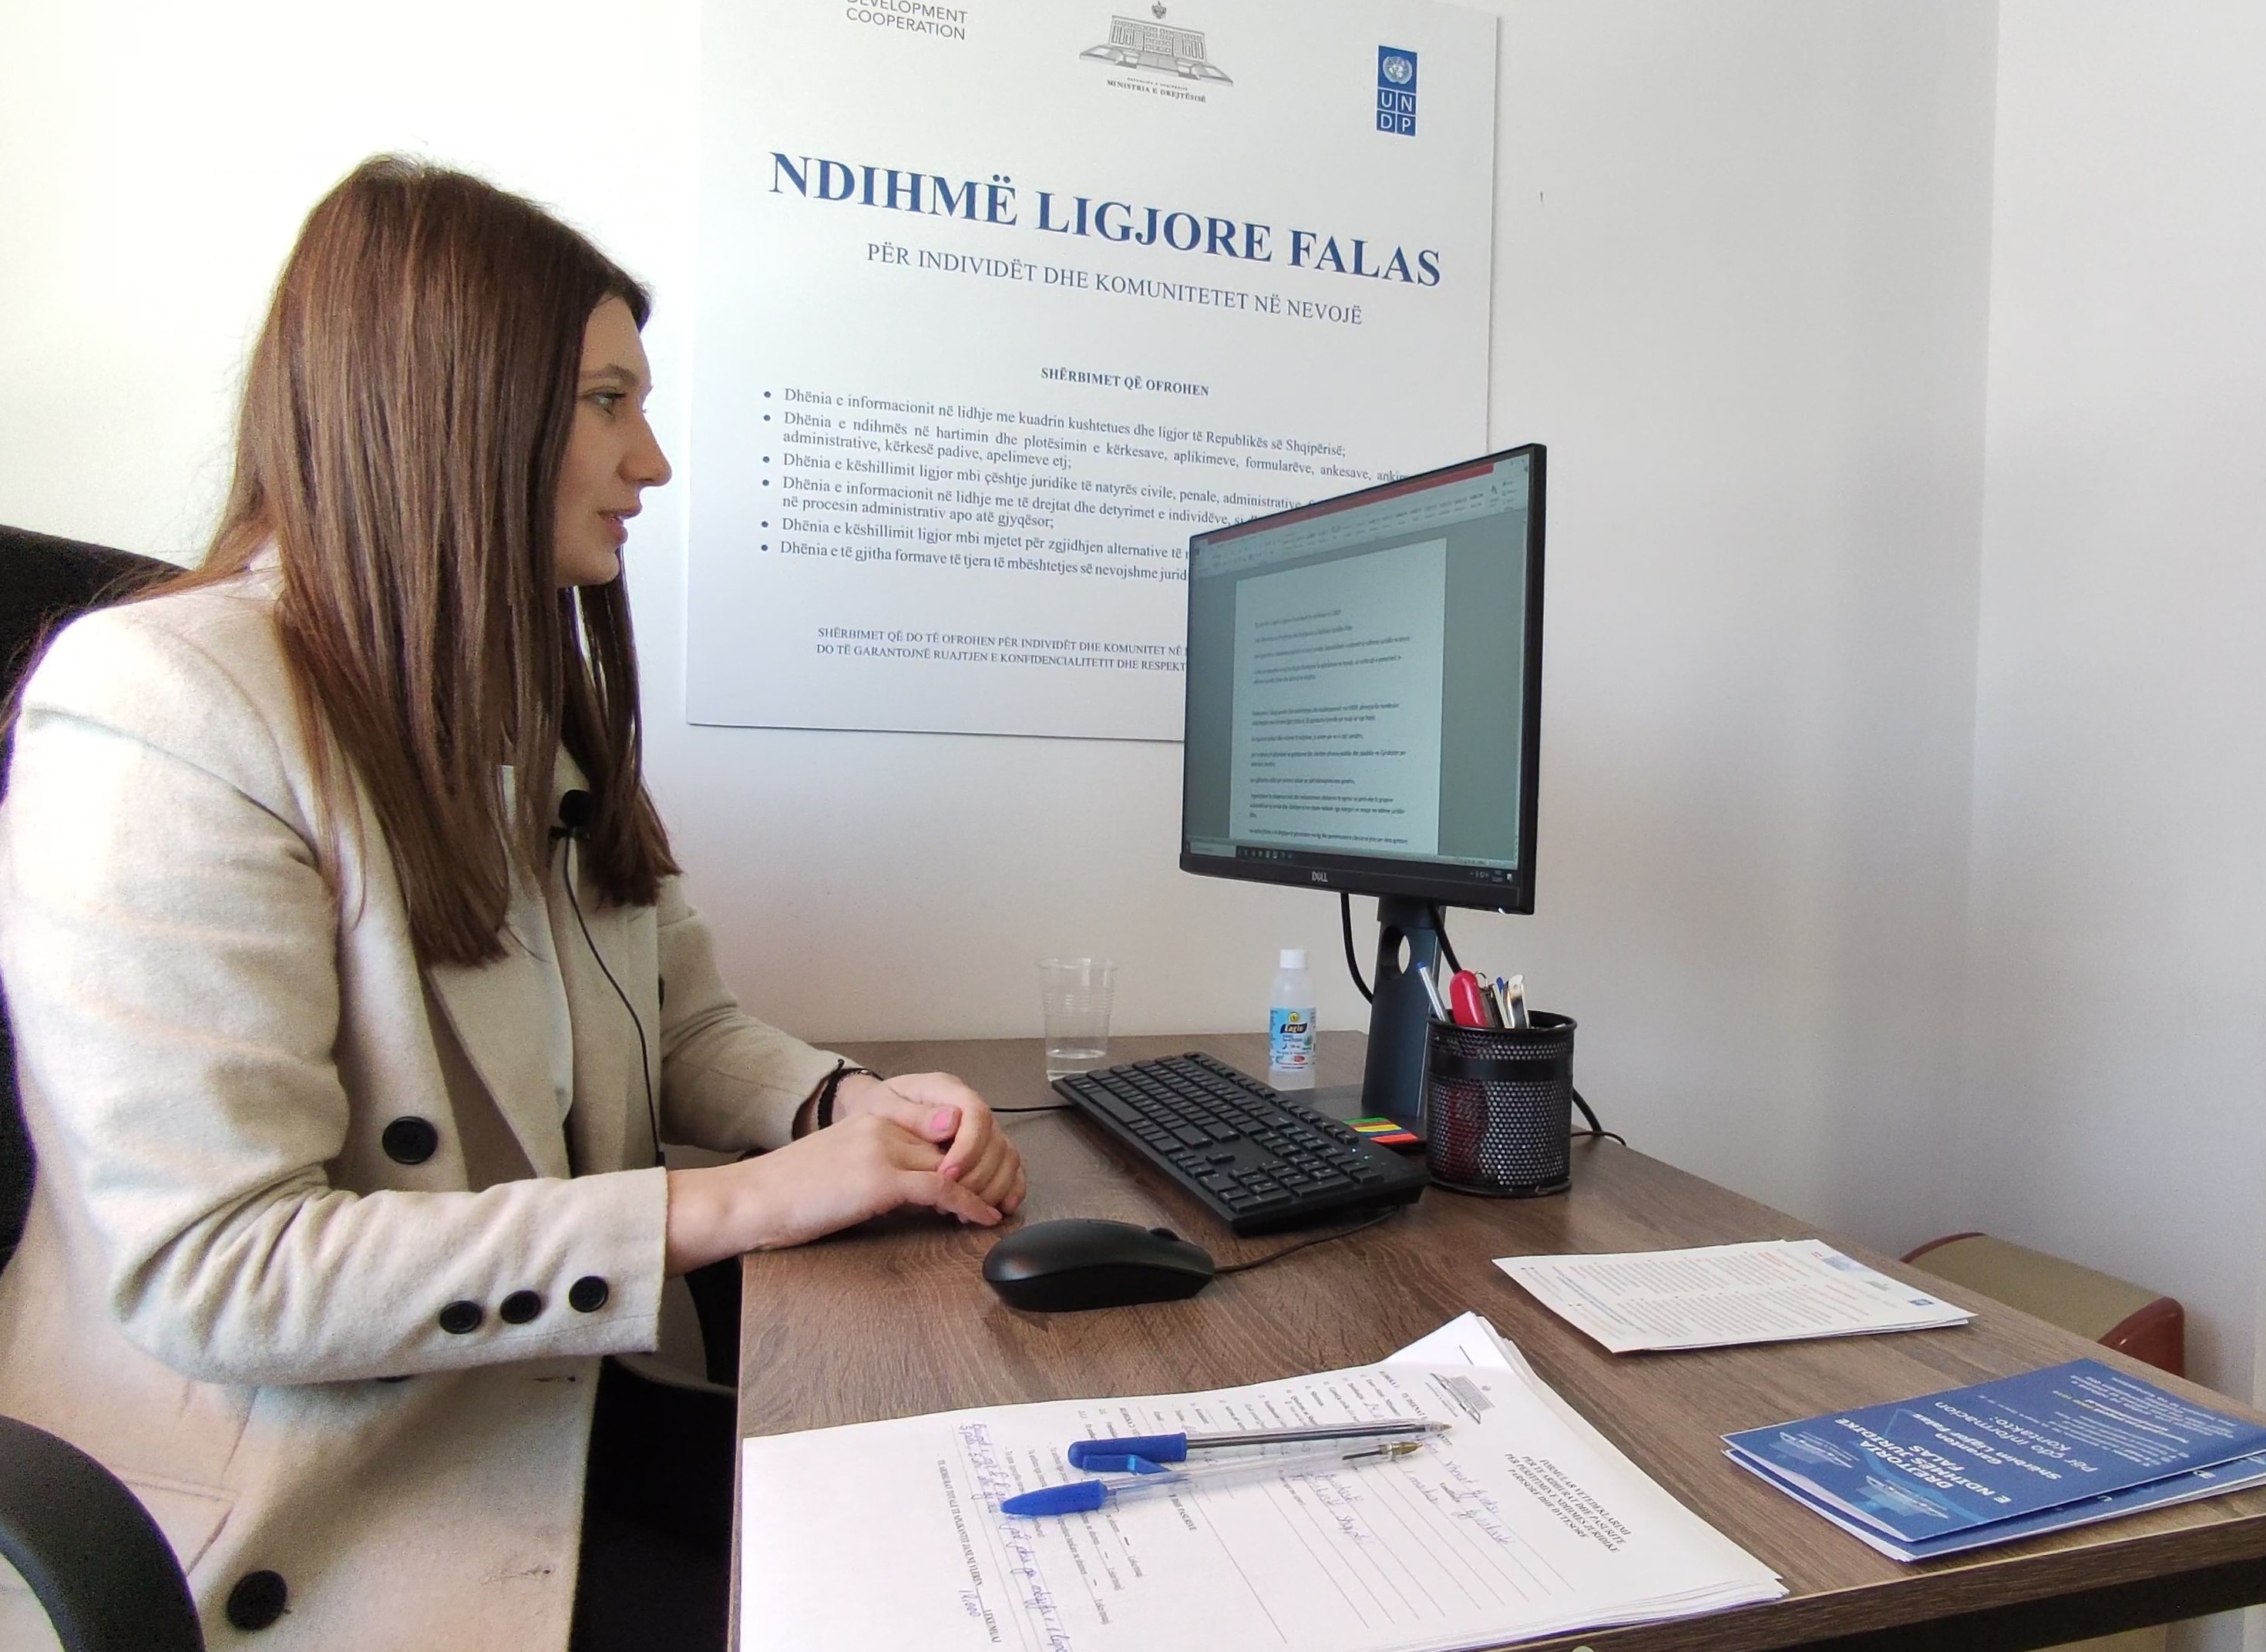 In partnership with the Austrian Development Cooperation, the United Nations Development Program (UNDP) has established 12 free legal aid centers across the country.